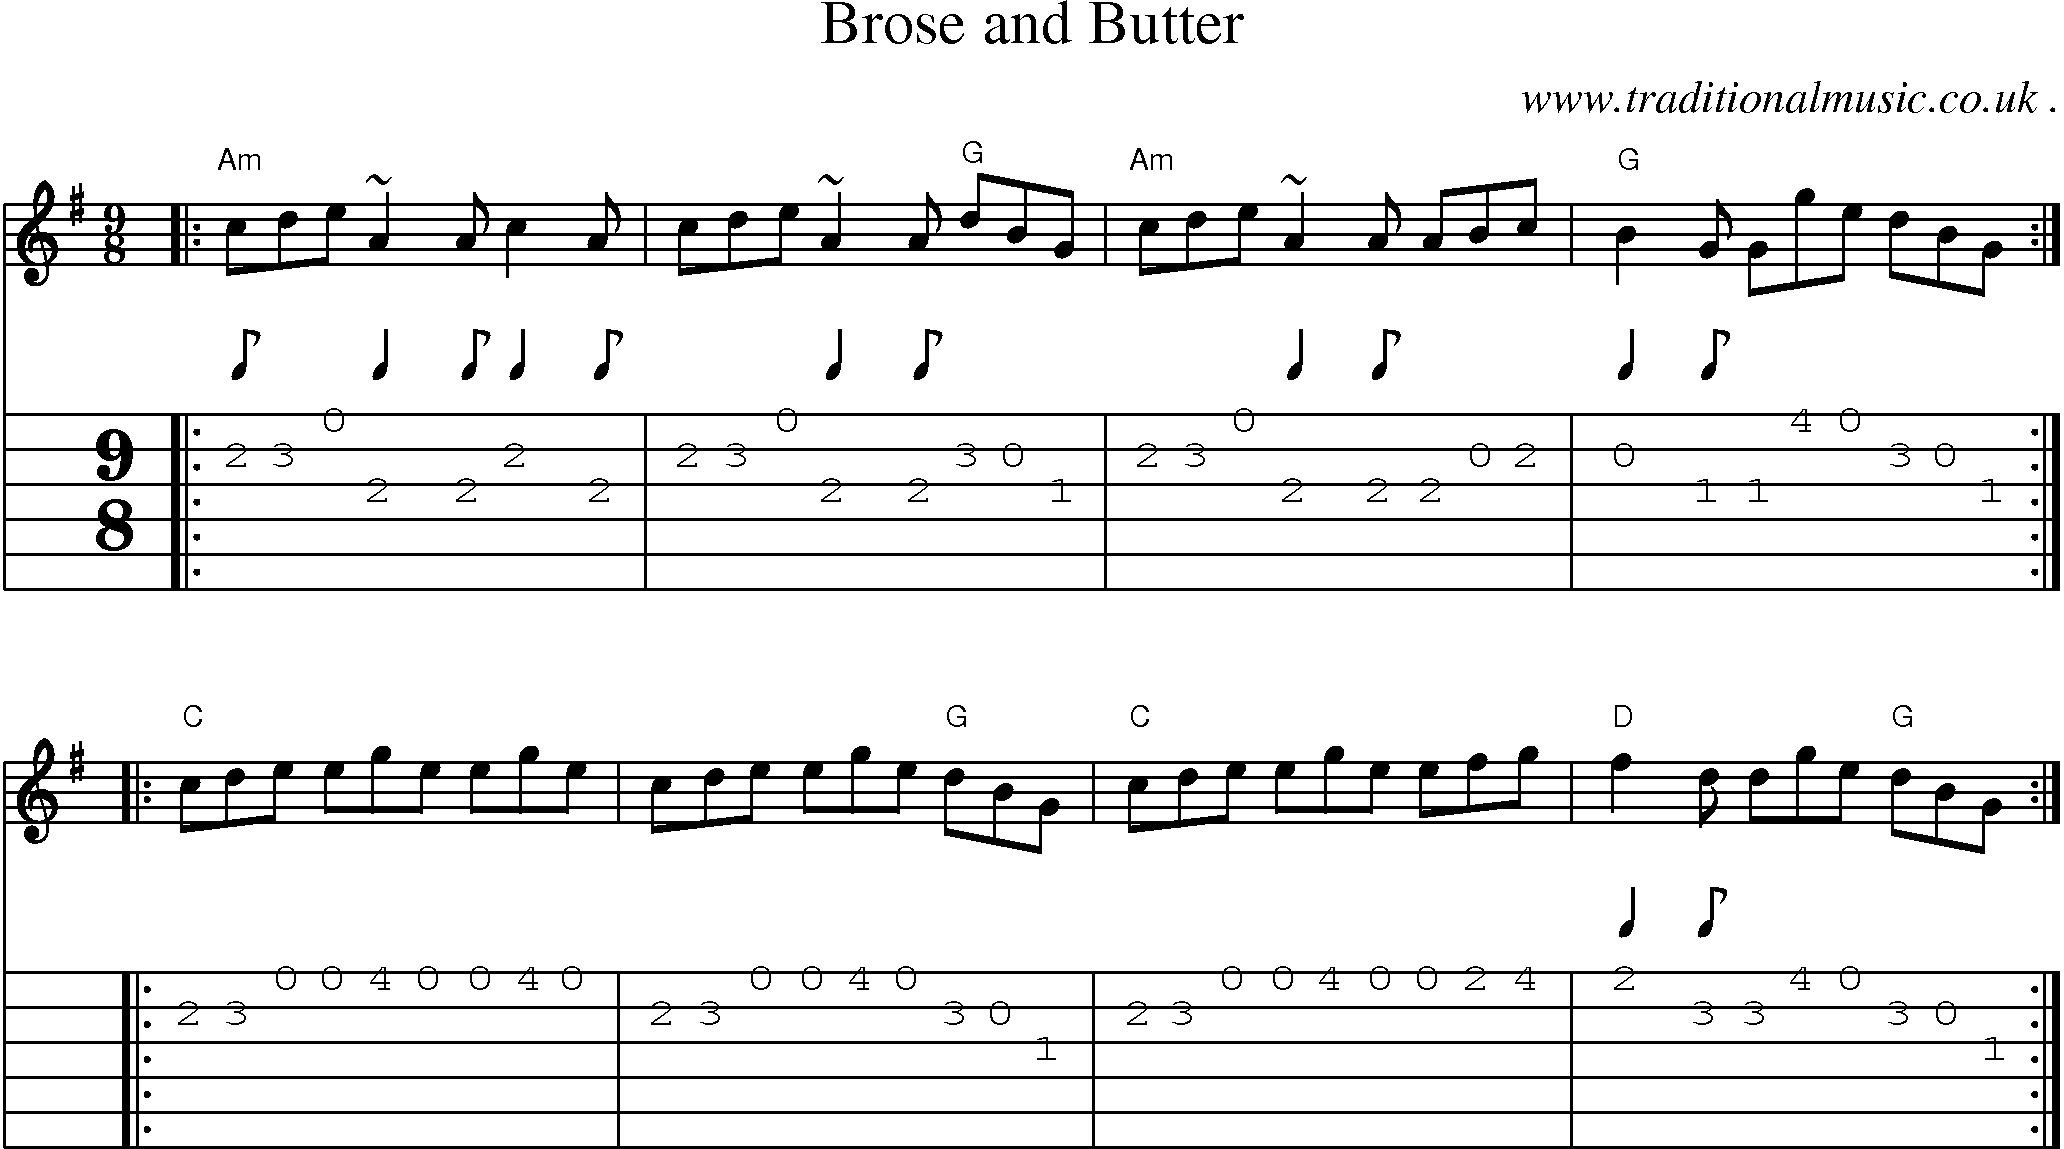 Sheet-music  score, Chords and Guitar Tabs for Brose And Butter